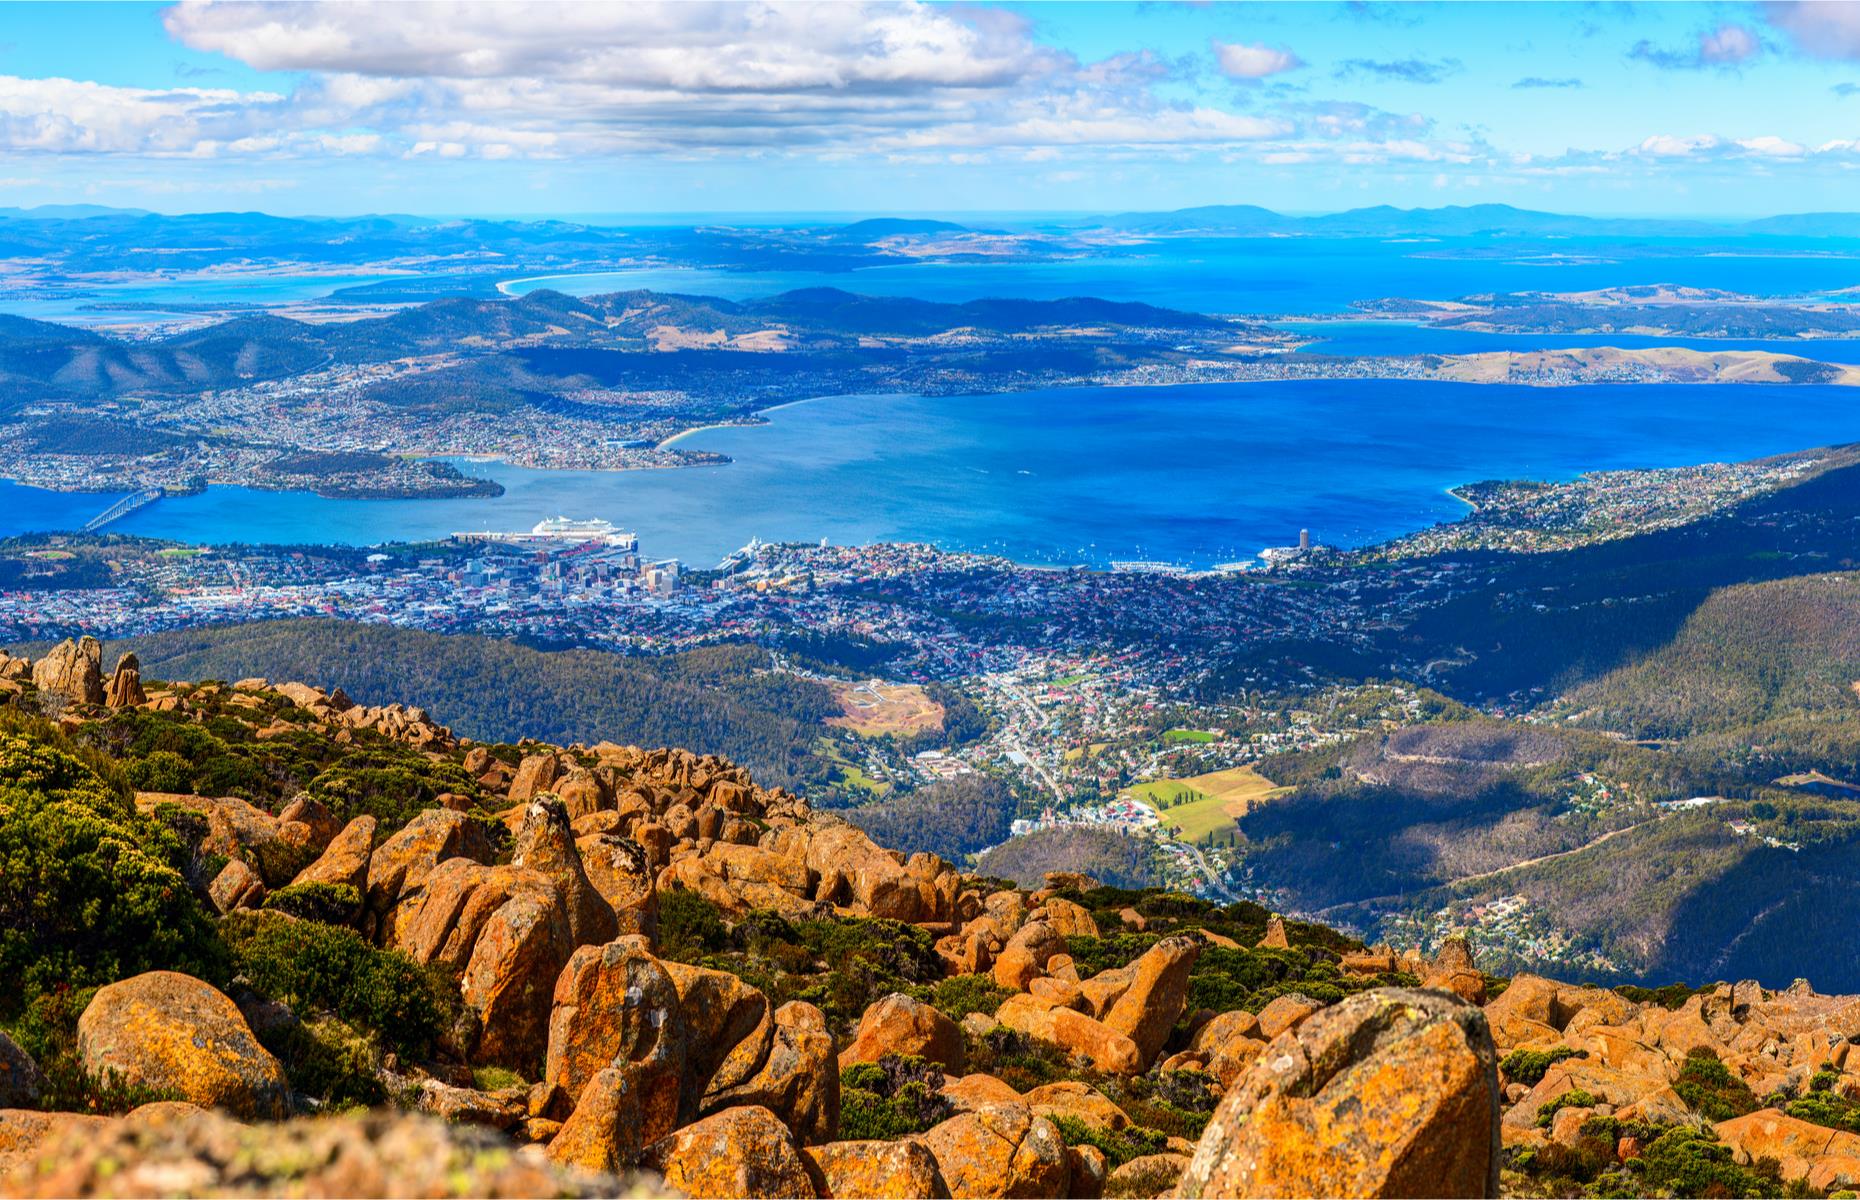 <p>Hobart, Australia’s southernmost capital, has plenty to entertain – <a href="https://mona.net.au/">Mona</a> museum is a wonder both inside and out (it’s free for Tasmanians and under 12s, but you do have to pre-book), as is atmospheric wharf area Salamanca, with its heritage buildings and markets, and the <a href="https://www.tmag.tas.gov.au/">Tasmanian Museum and Art Gallery</a> (completely free to enter). But for the best views in town, take a walk up or around the bush tracks on Mount Wellington, which looms atmospherically over the city of Hobart and the River Derwent.</p>